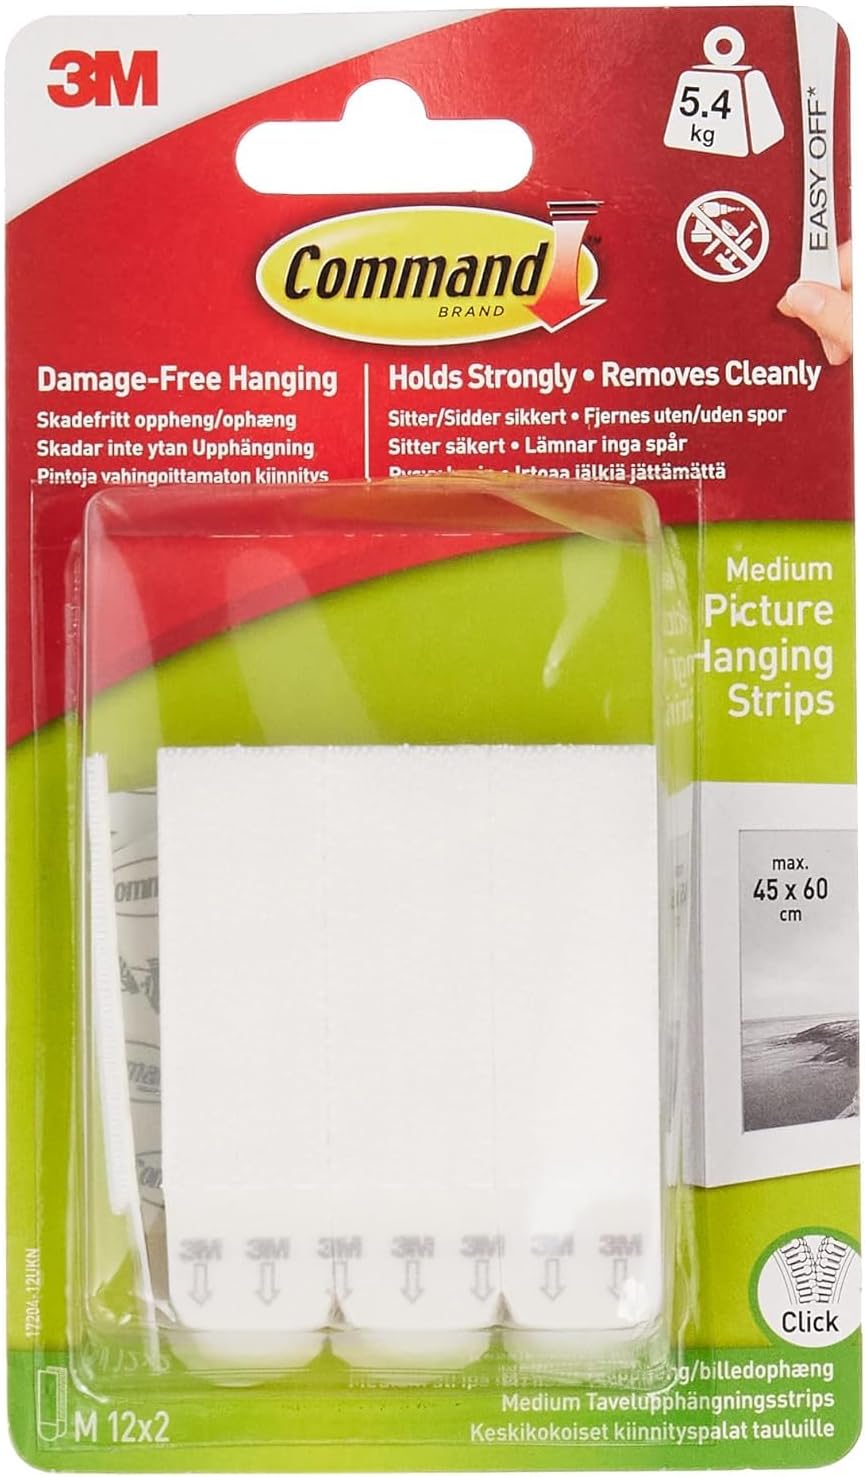 3M COMMAND STRIPS 1704136